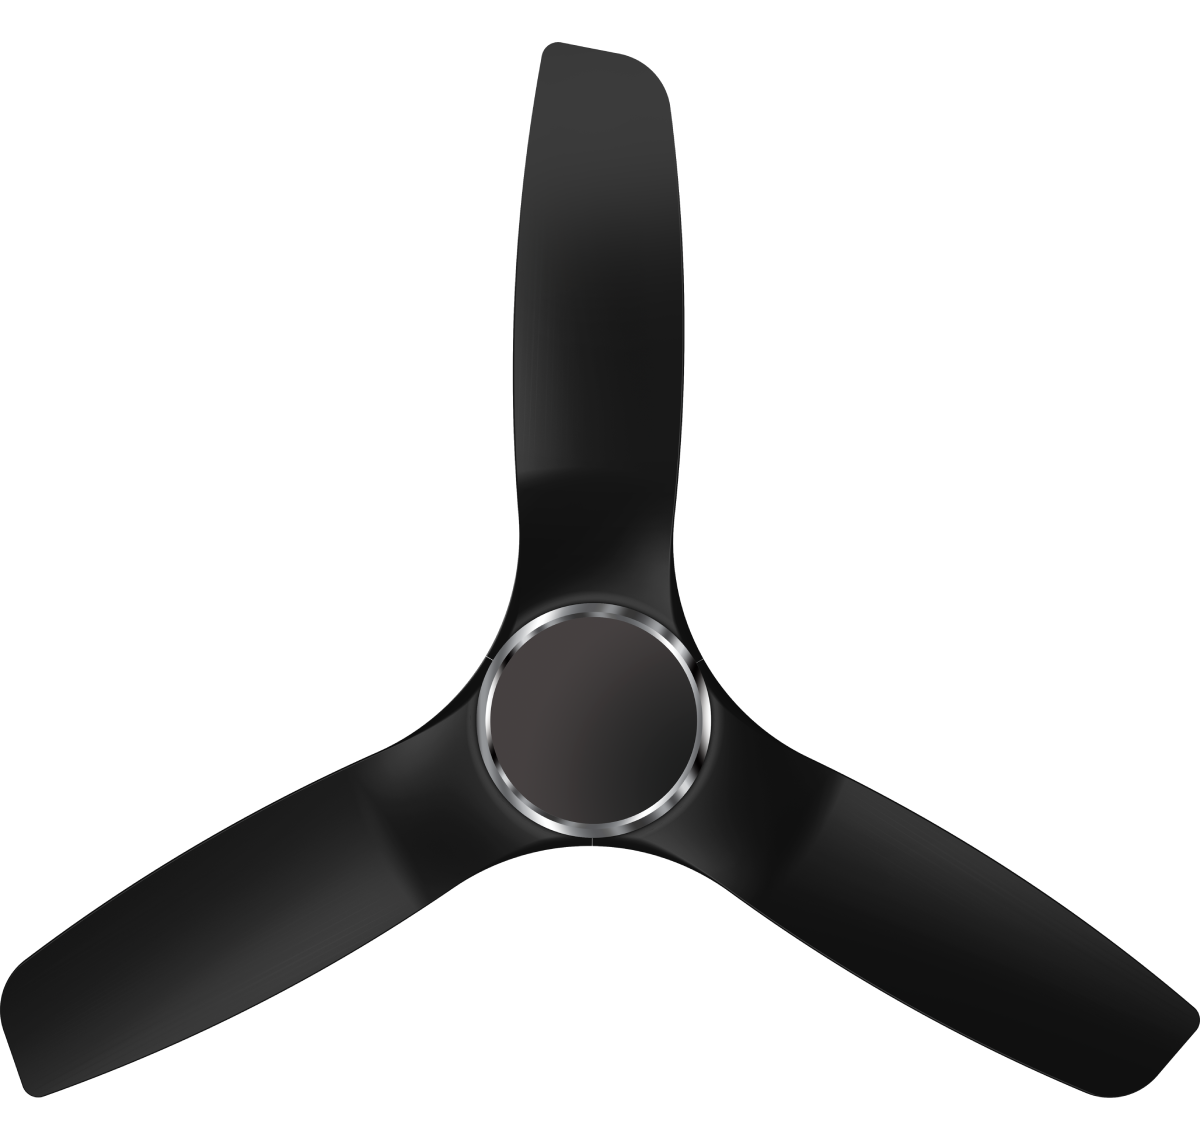 Havells BLDC Ceiling Fan 1200mm STEALTH AIR BLDC